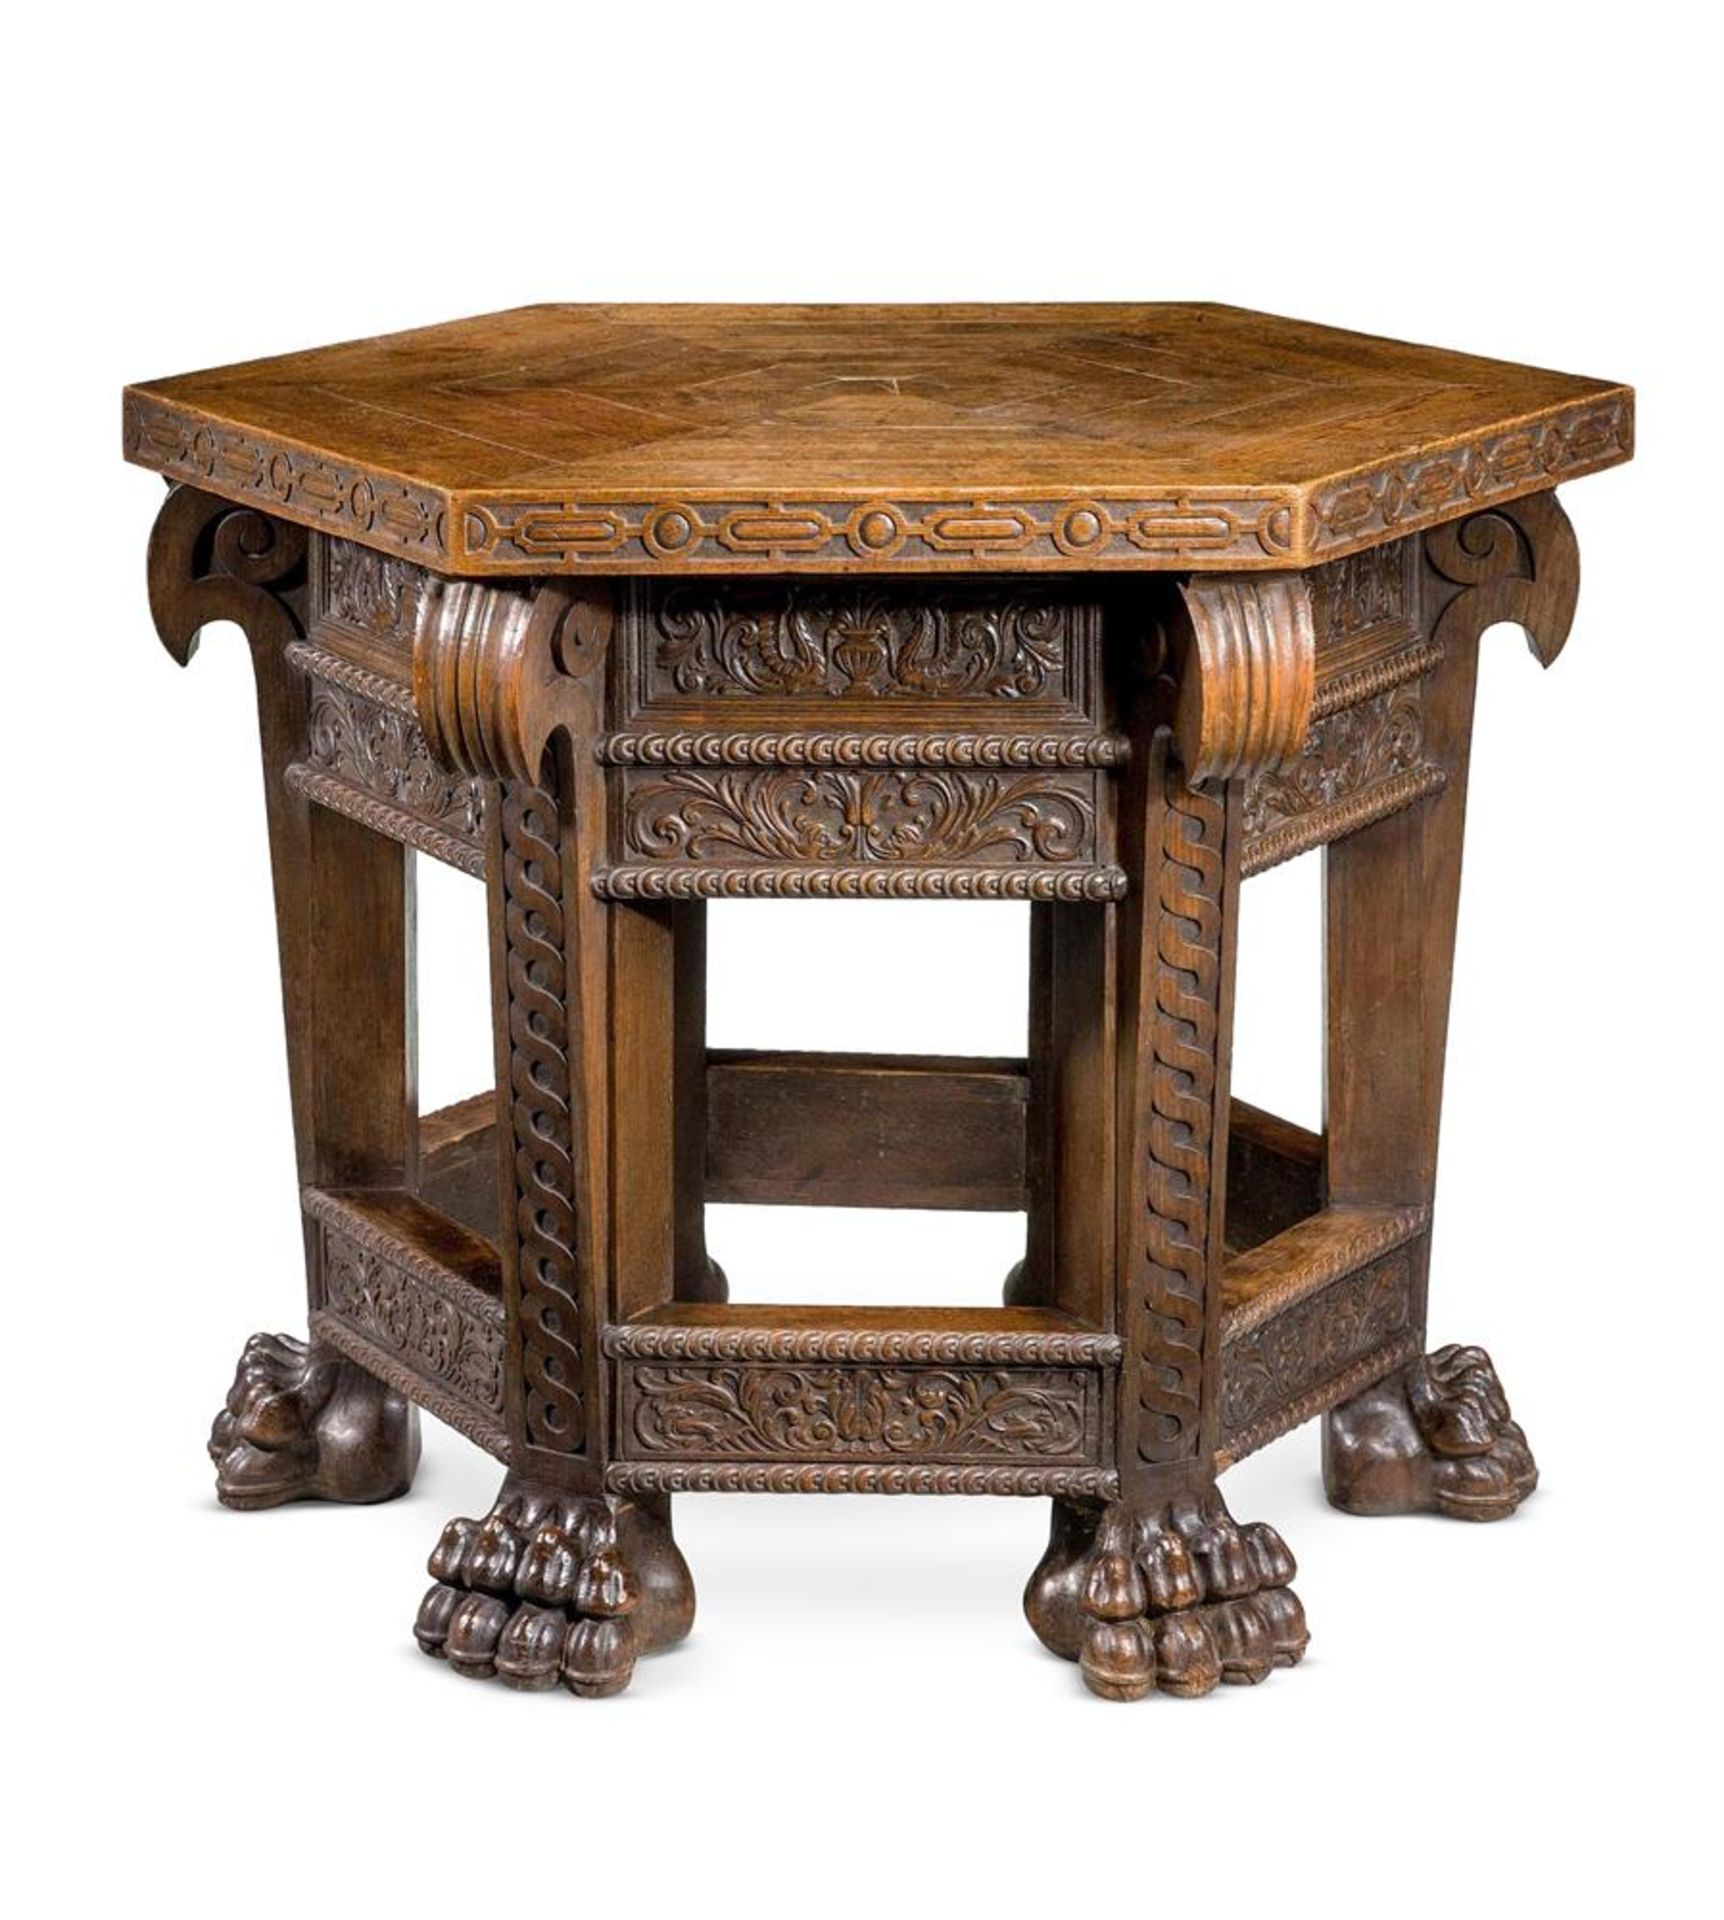 A CARVED OAK CENTRE TABLE, IN 17TH CENTURY STYLE, SECOND HALF 19TH CENTURY